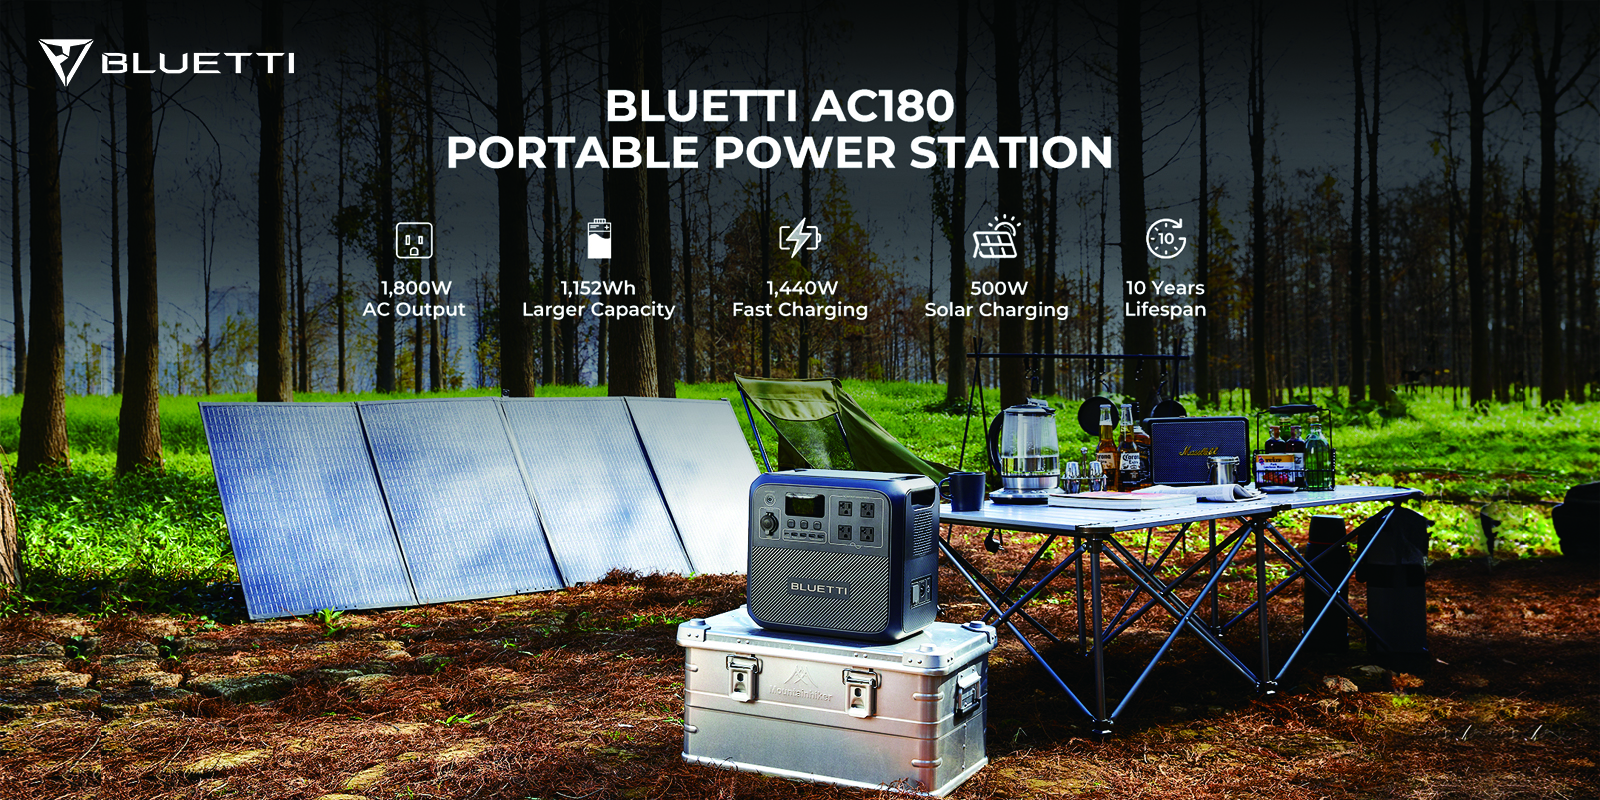 Head off-grid this summer with BLUETTI's AC180 Portable Power Station